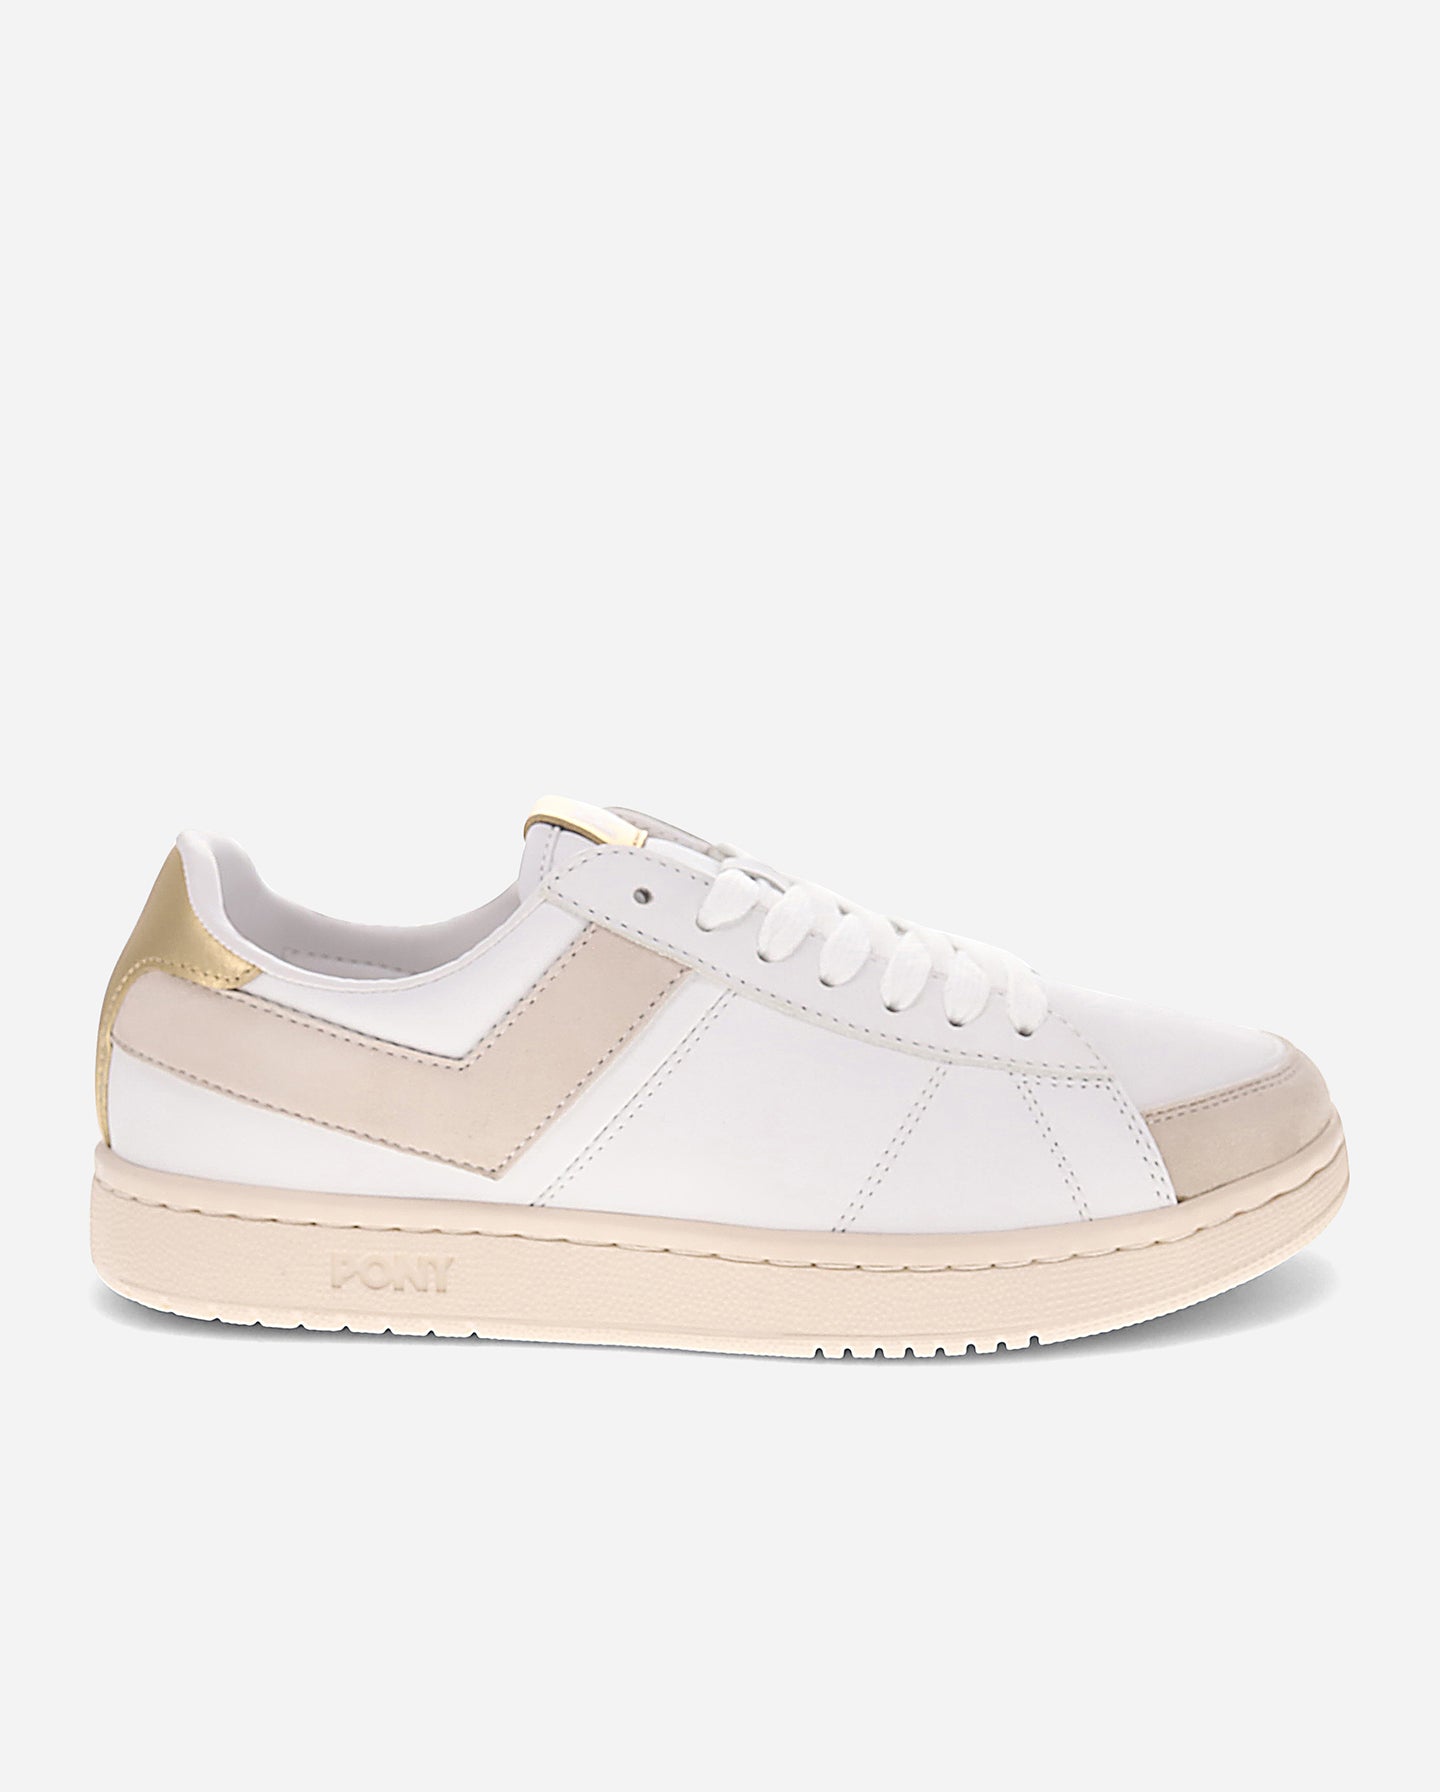 M-Pro in white/oatmeal/gold – (side/unisex)